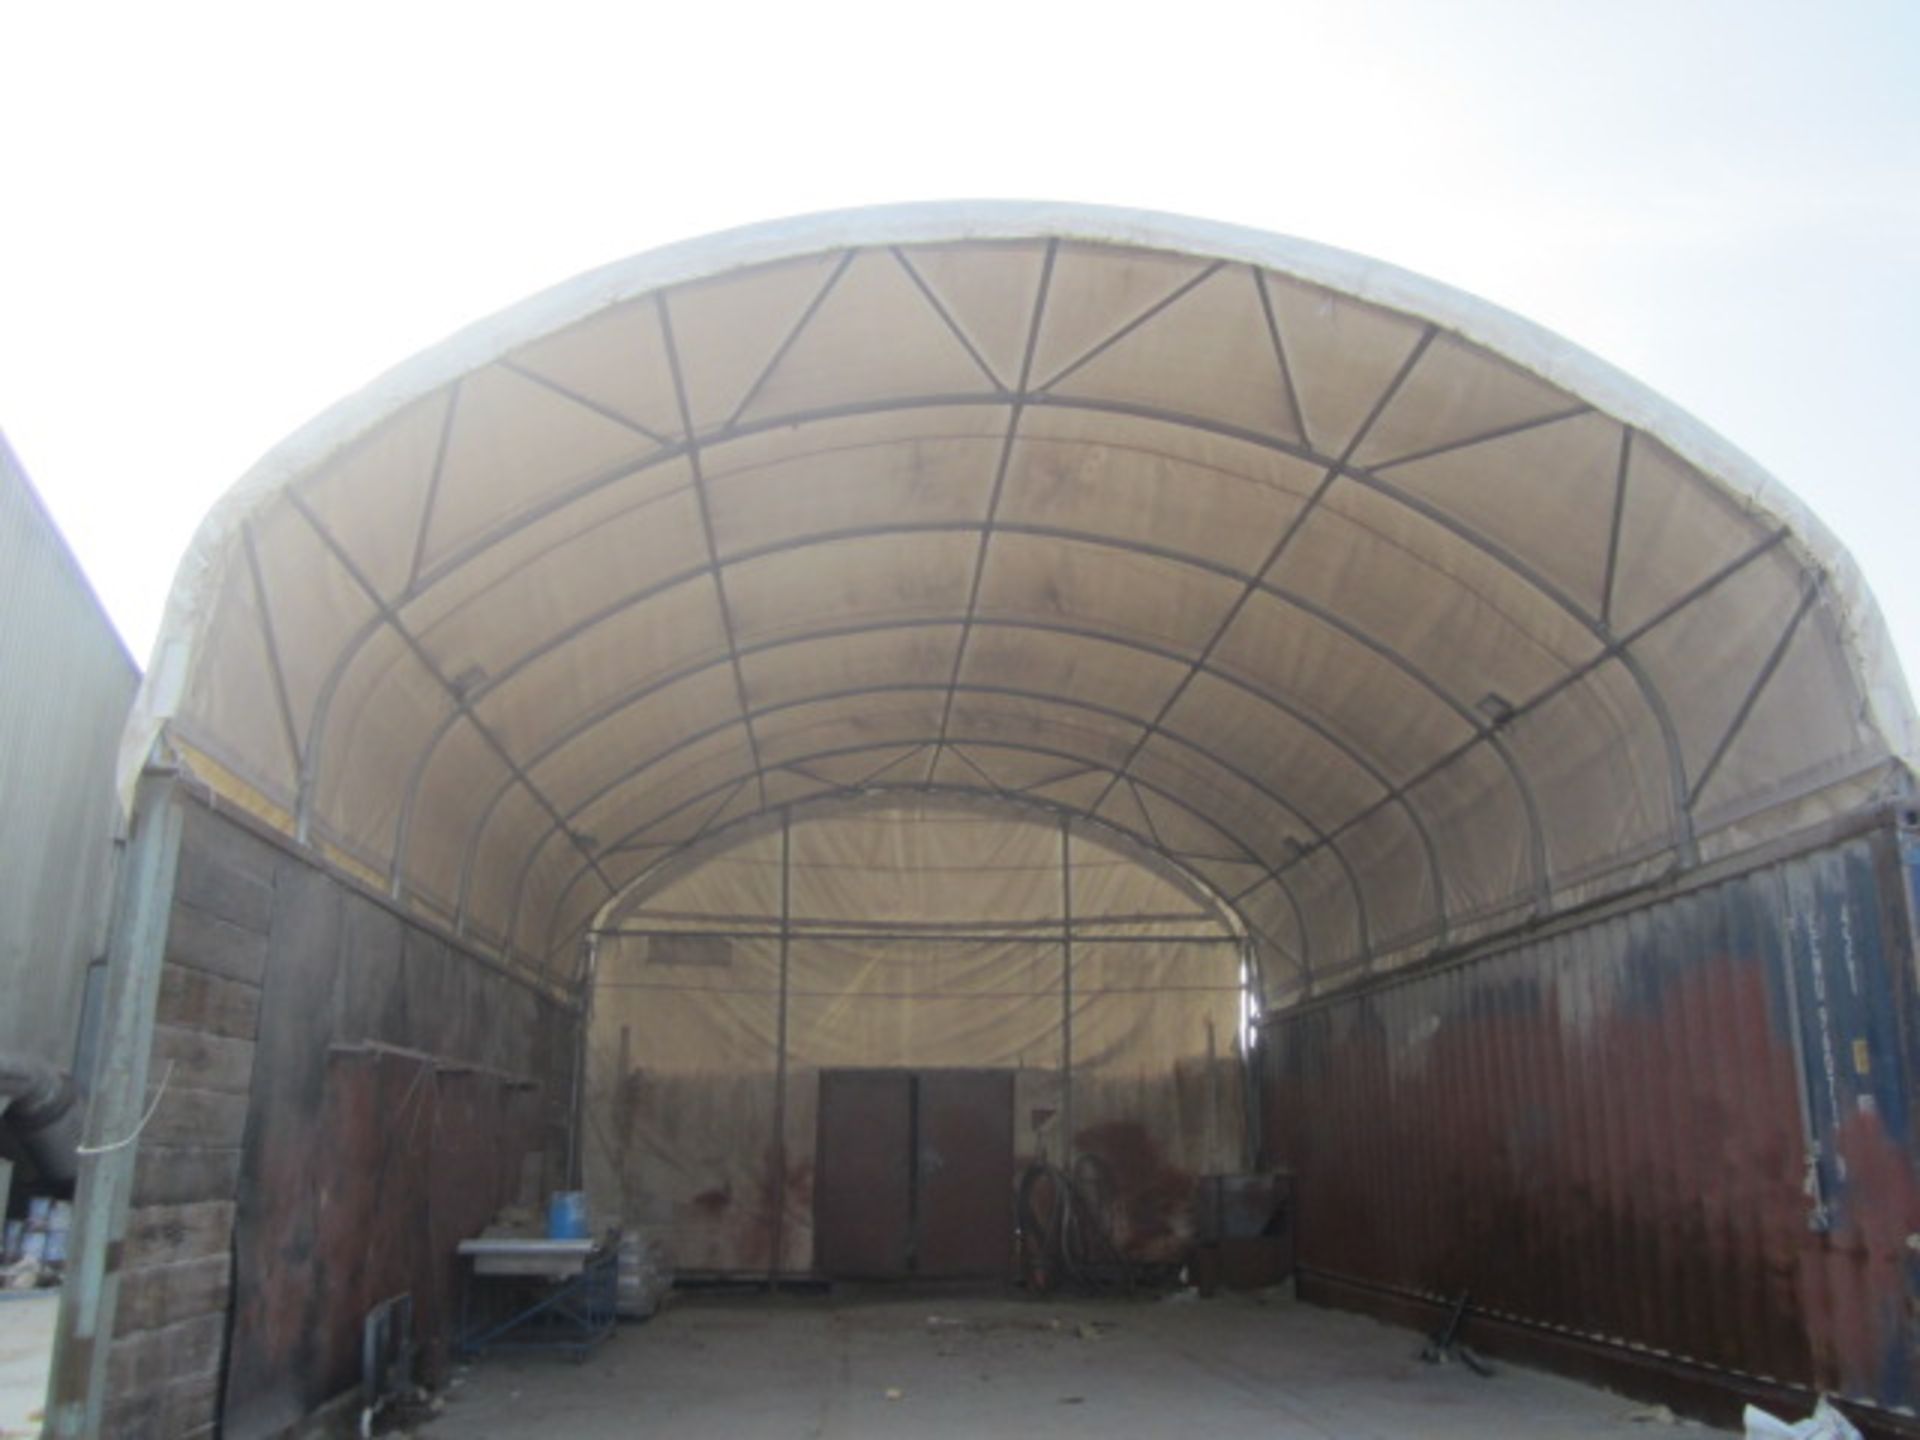 Shelter - IT portable industrial canopy, tubular frame, approx. 40ft length x 22ft width x 20ft